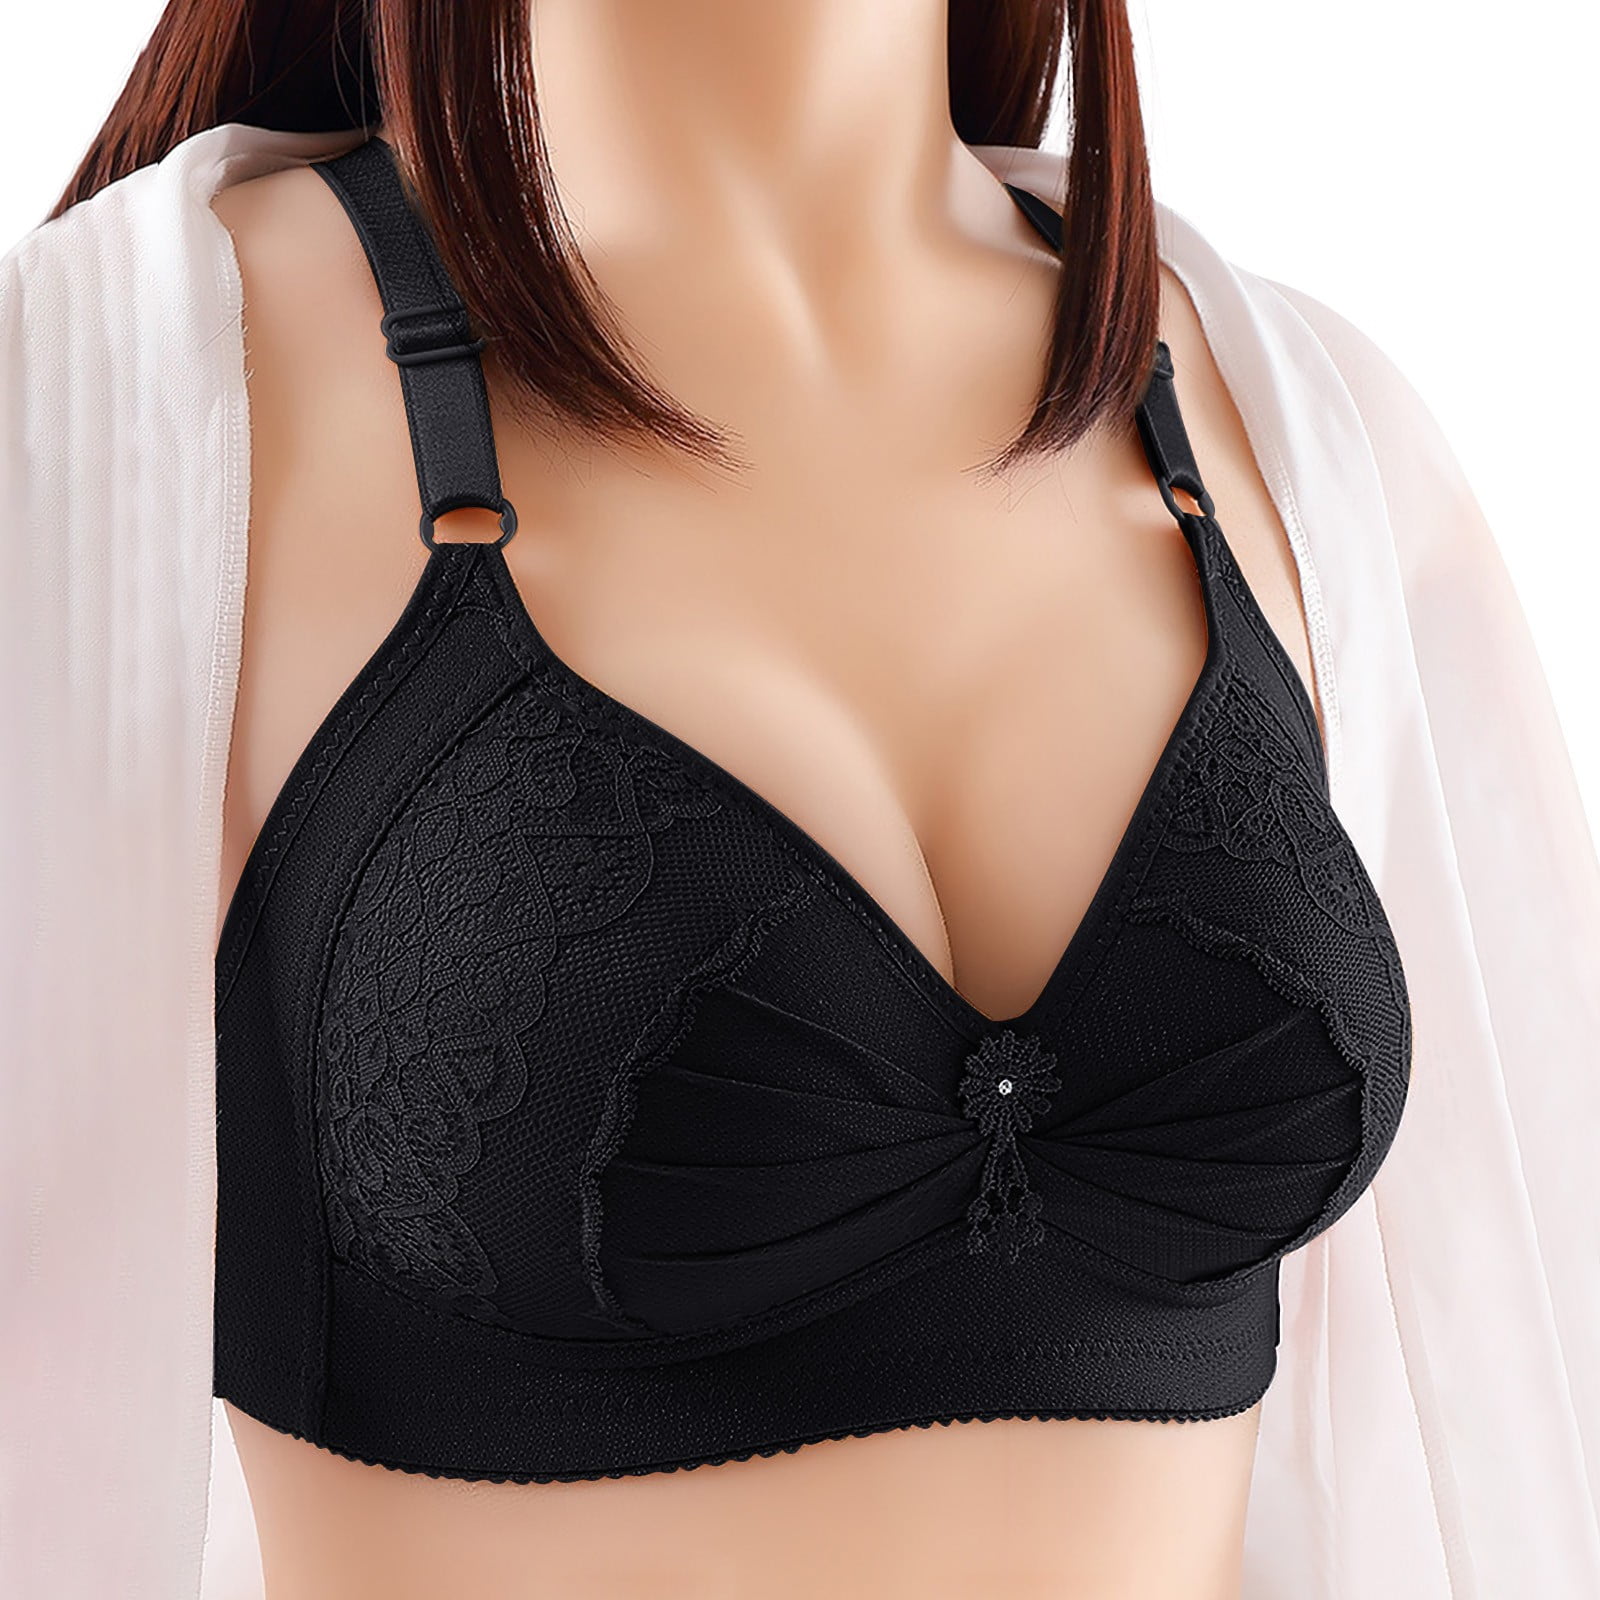 Woman's Black Nicole bra with Lift effect, without underwire